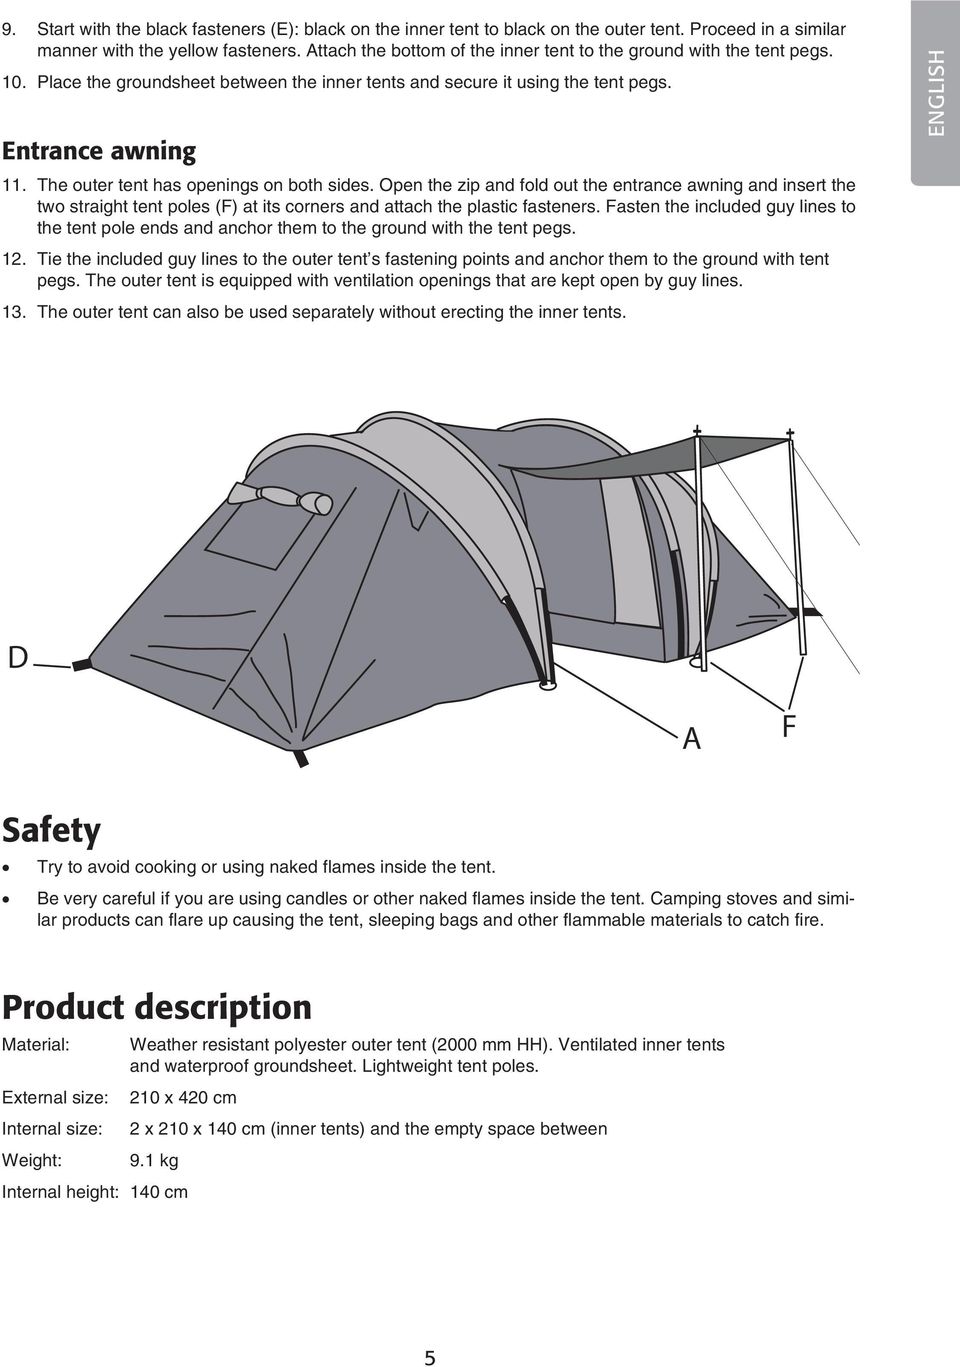 The outer tent has openings on both sides. Open the zip and fold out the entrance awning and insert the two straight tent poles (F) at its corners and attach the plastic fasteners.